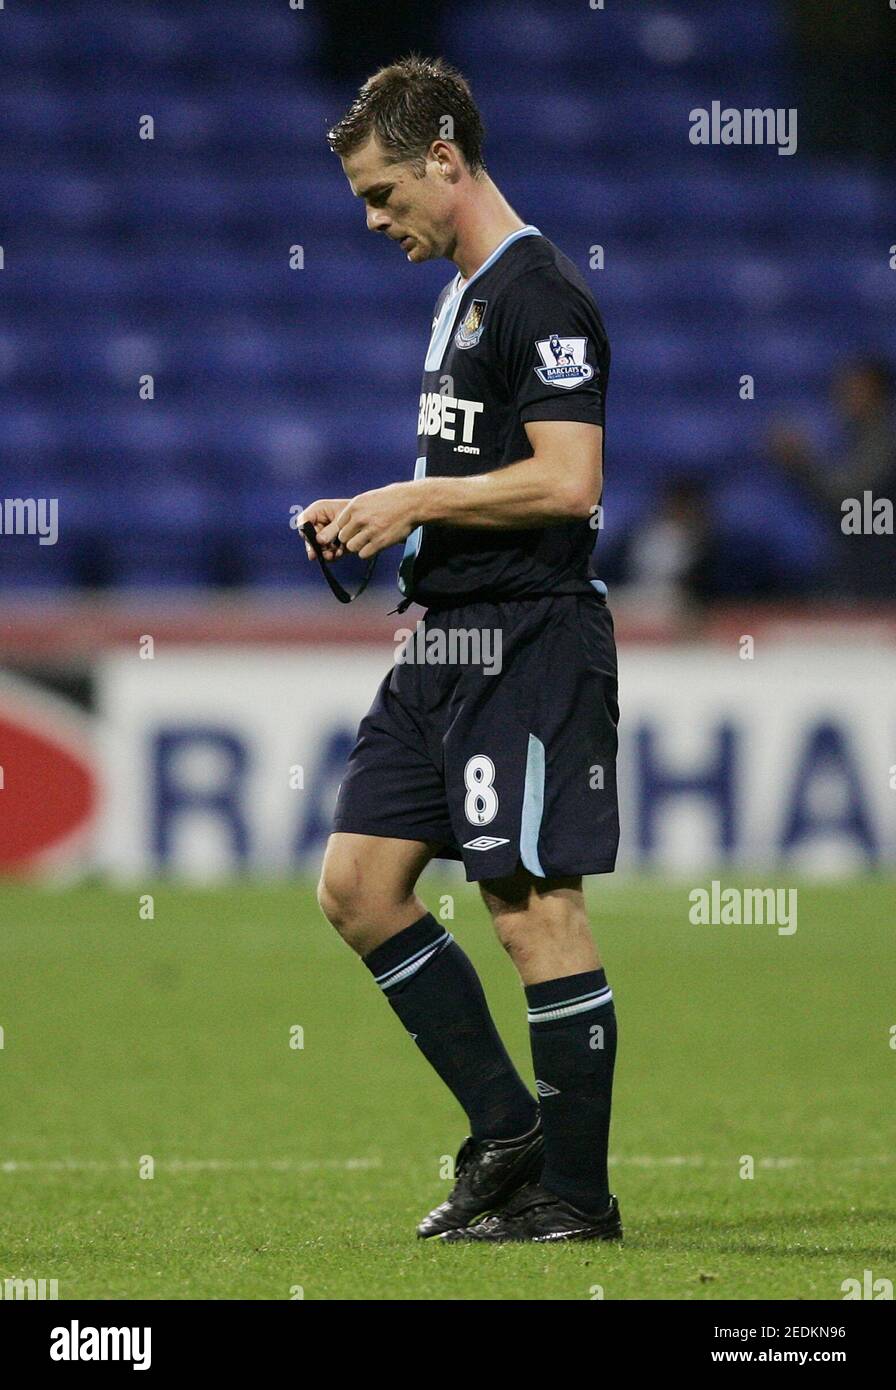 Football - Bolton Wanderers v West Ham United Carling Cup Third Round - The  Reebok Stadium - 09/10 - 22/9/09 West Ham's Scott Parker looks dejected  Mandatory Credit: Action Images / Alex Morton Livepic Stock Photo - Alamy